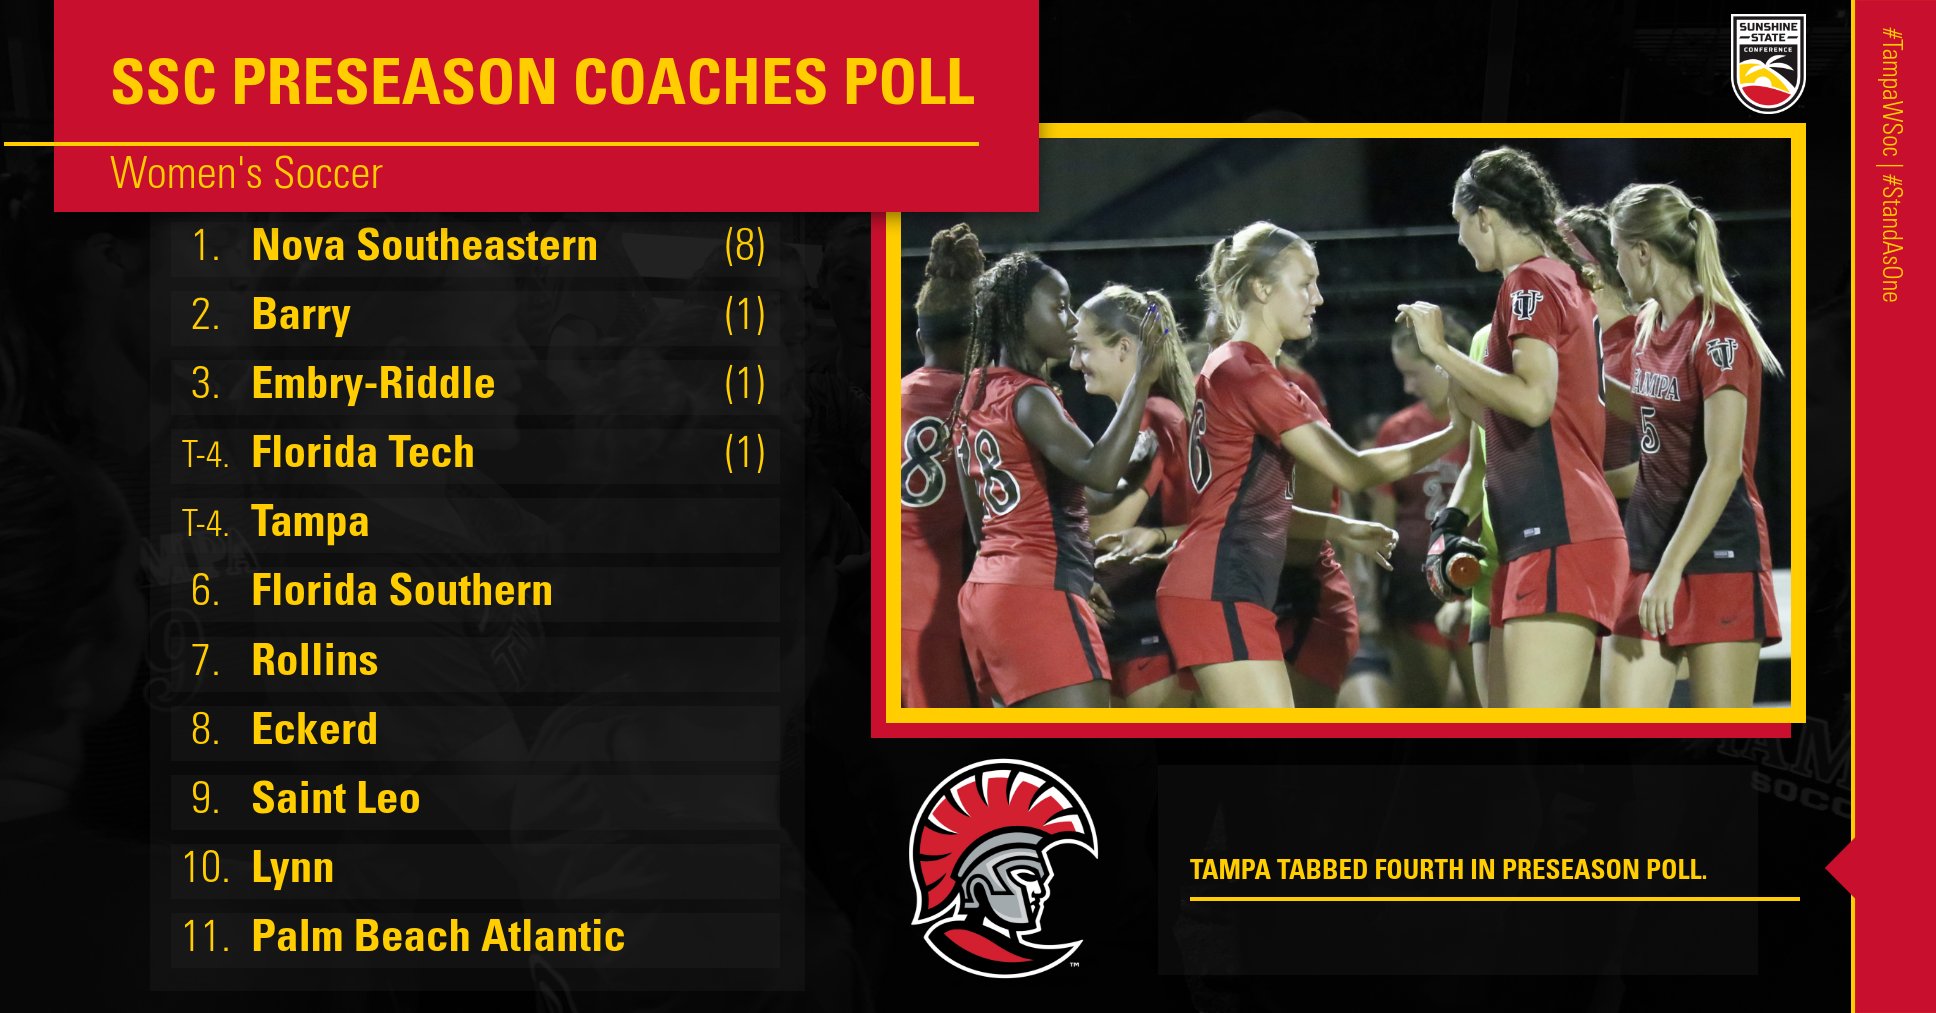 Tampa Women's Soccer Listed at No. 4 in SSC Preseason Poll